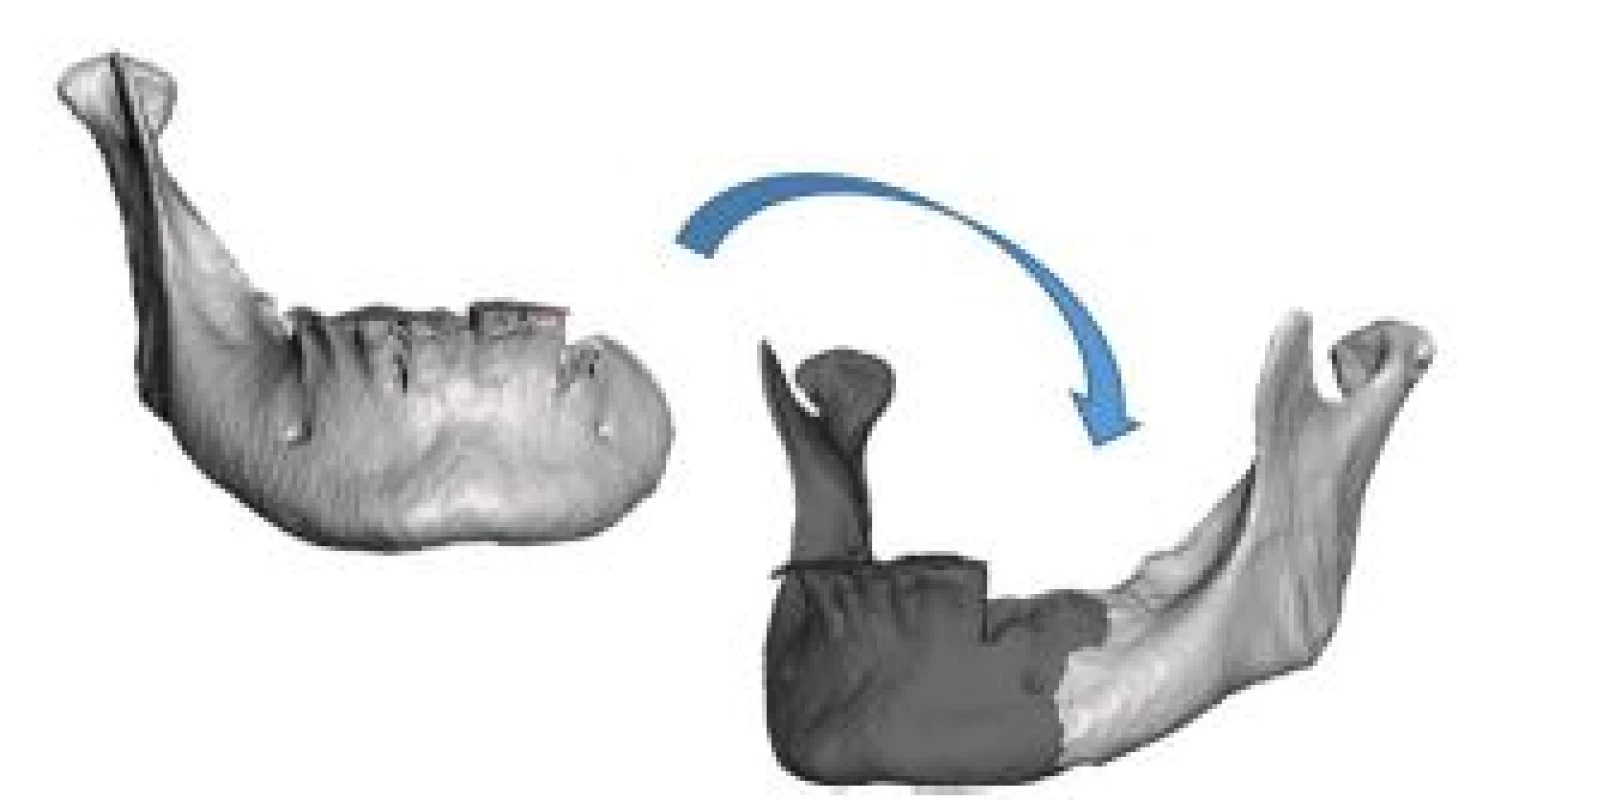 Mirror-based reconstruction approach for the design of the mandibular implant.